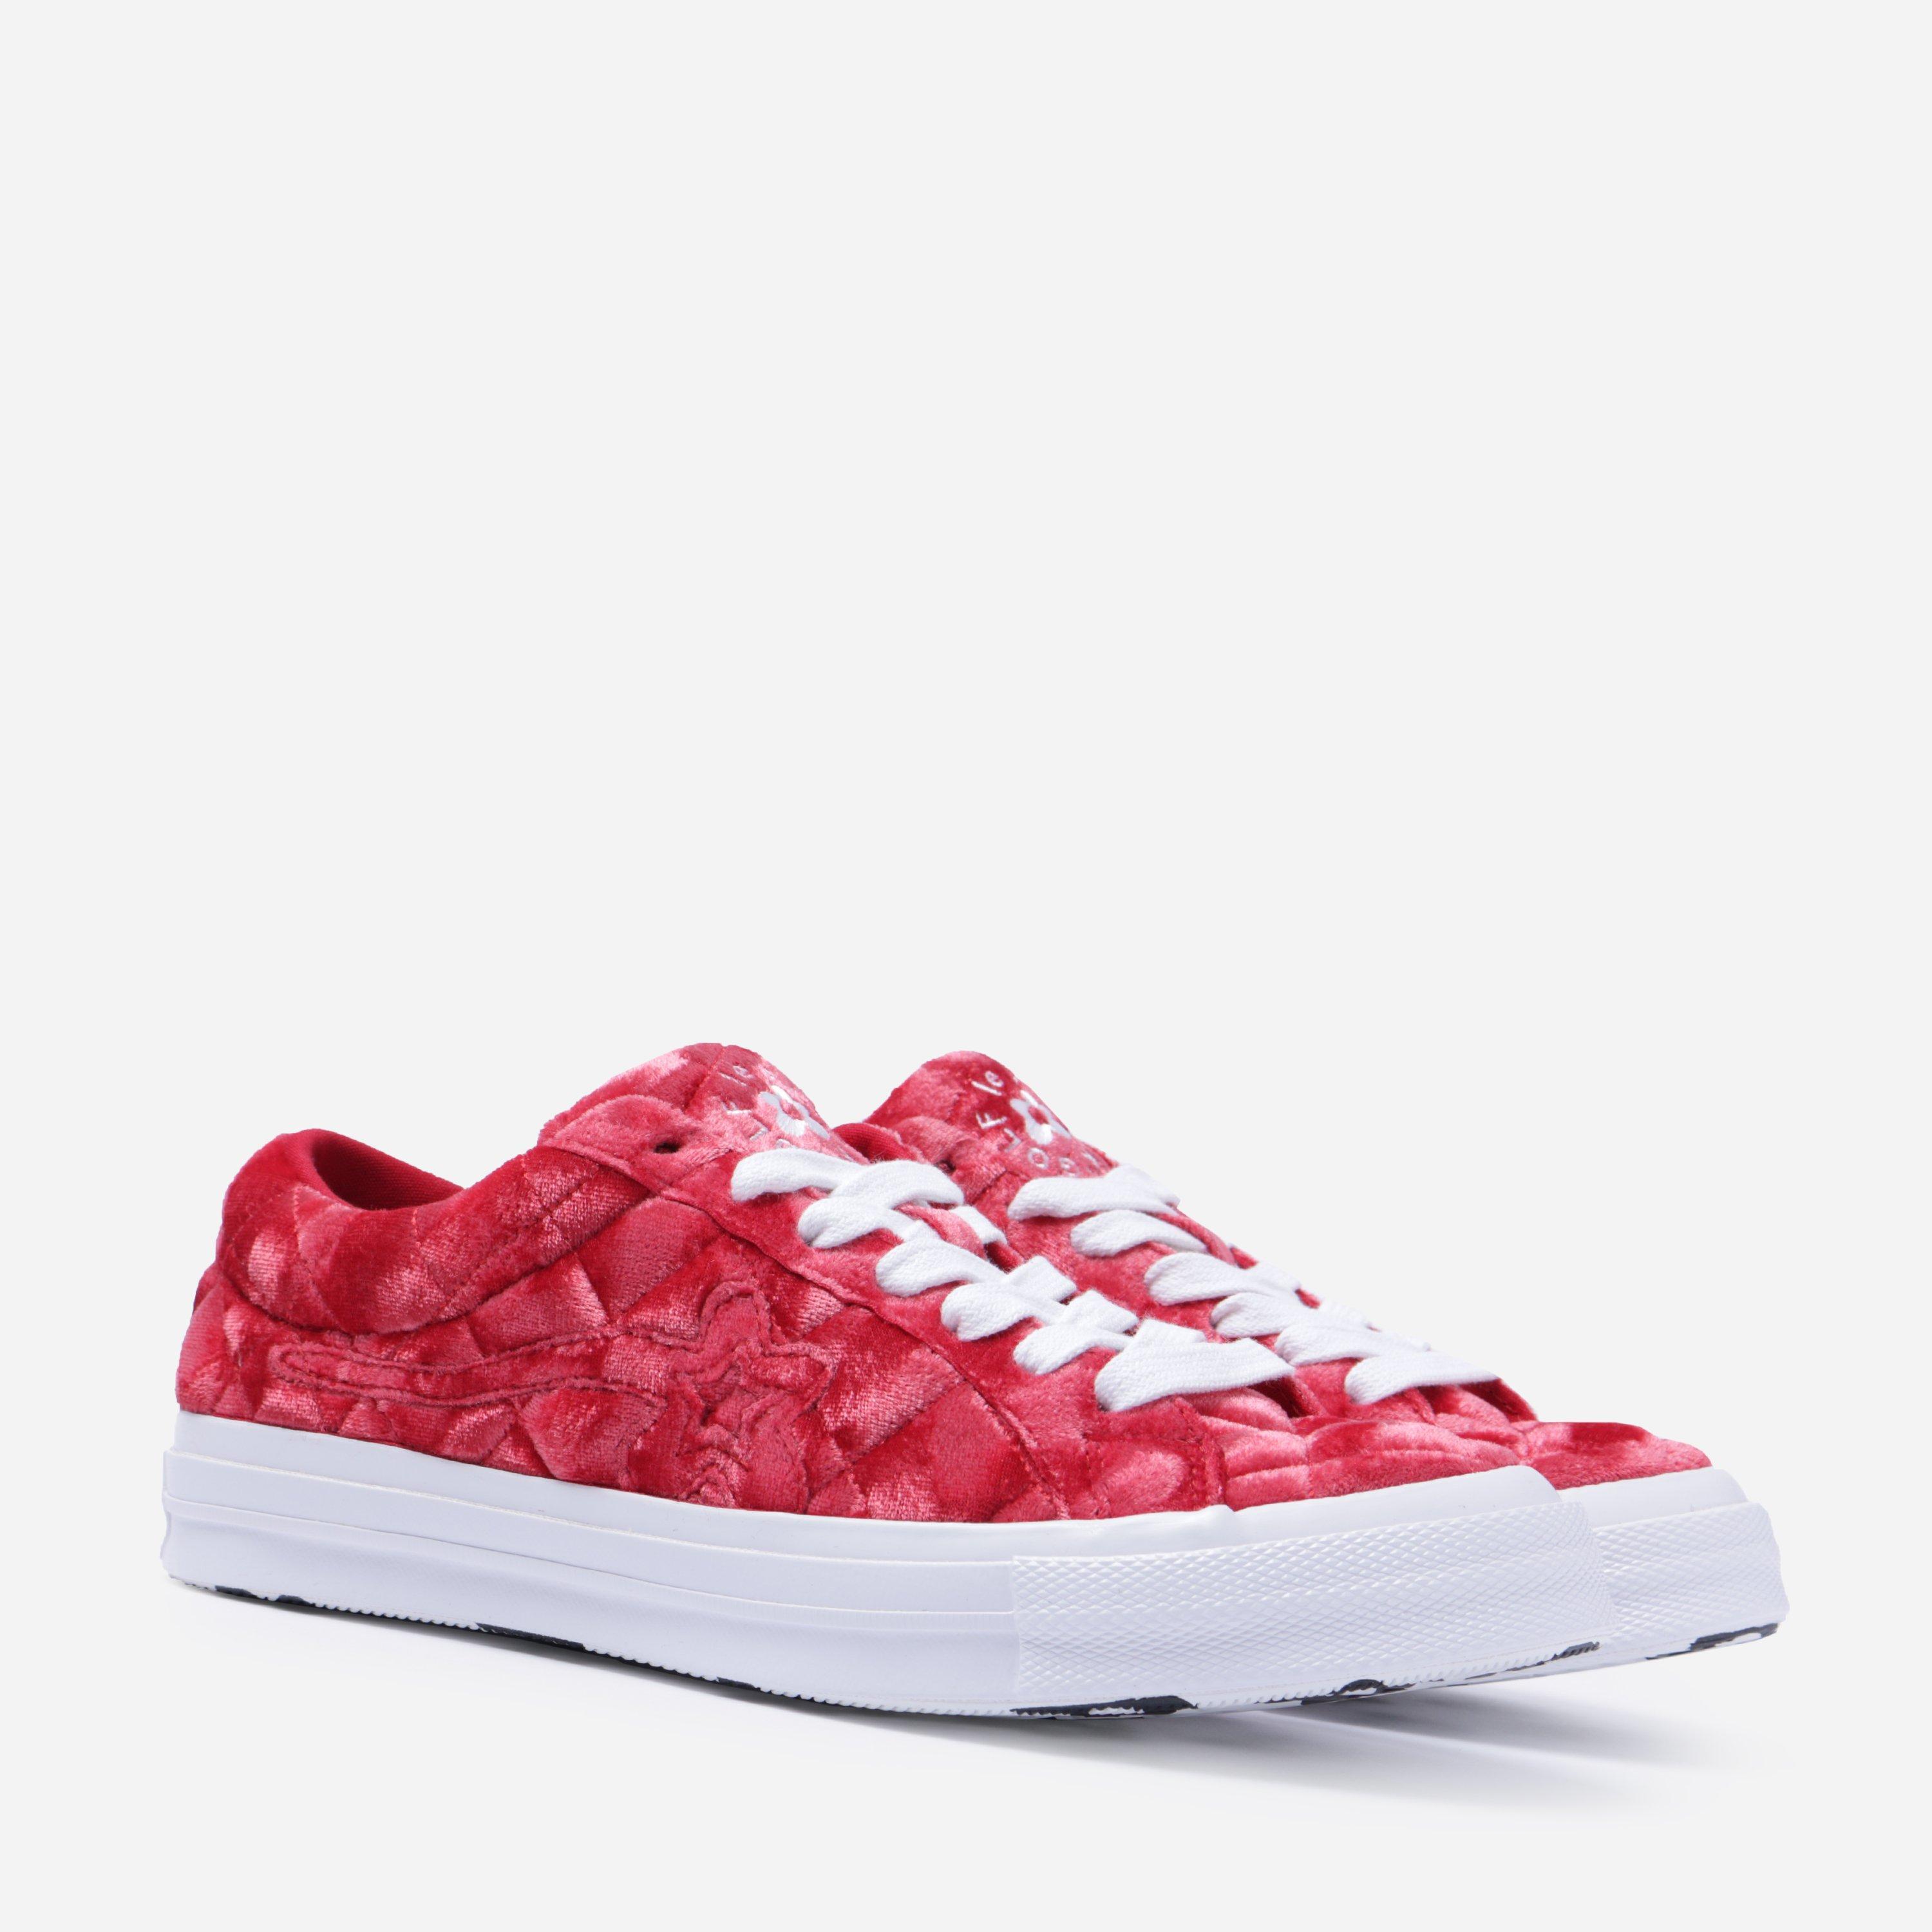 Converse X Golf Le Fleur* One Star in Red for Men - Lyst